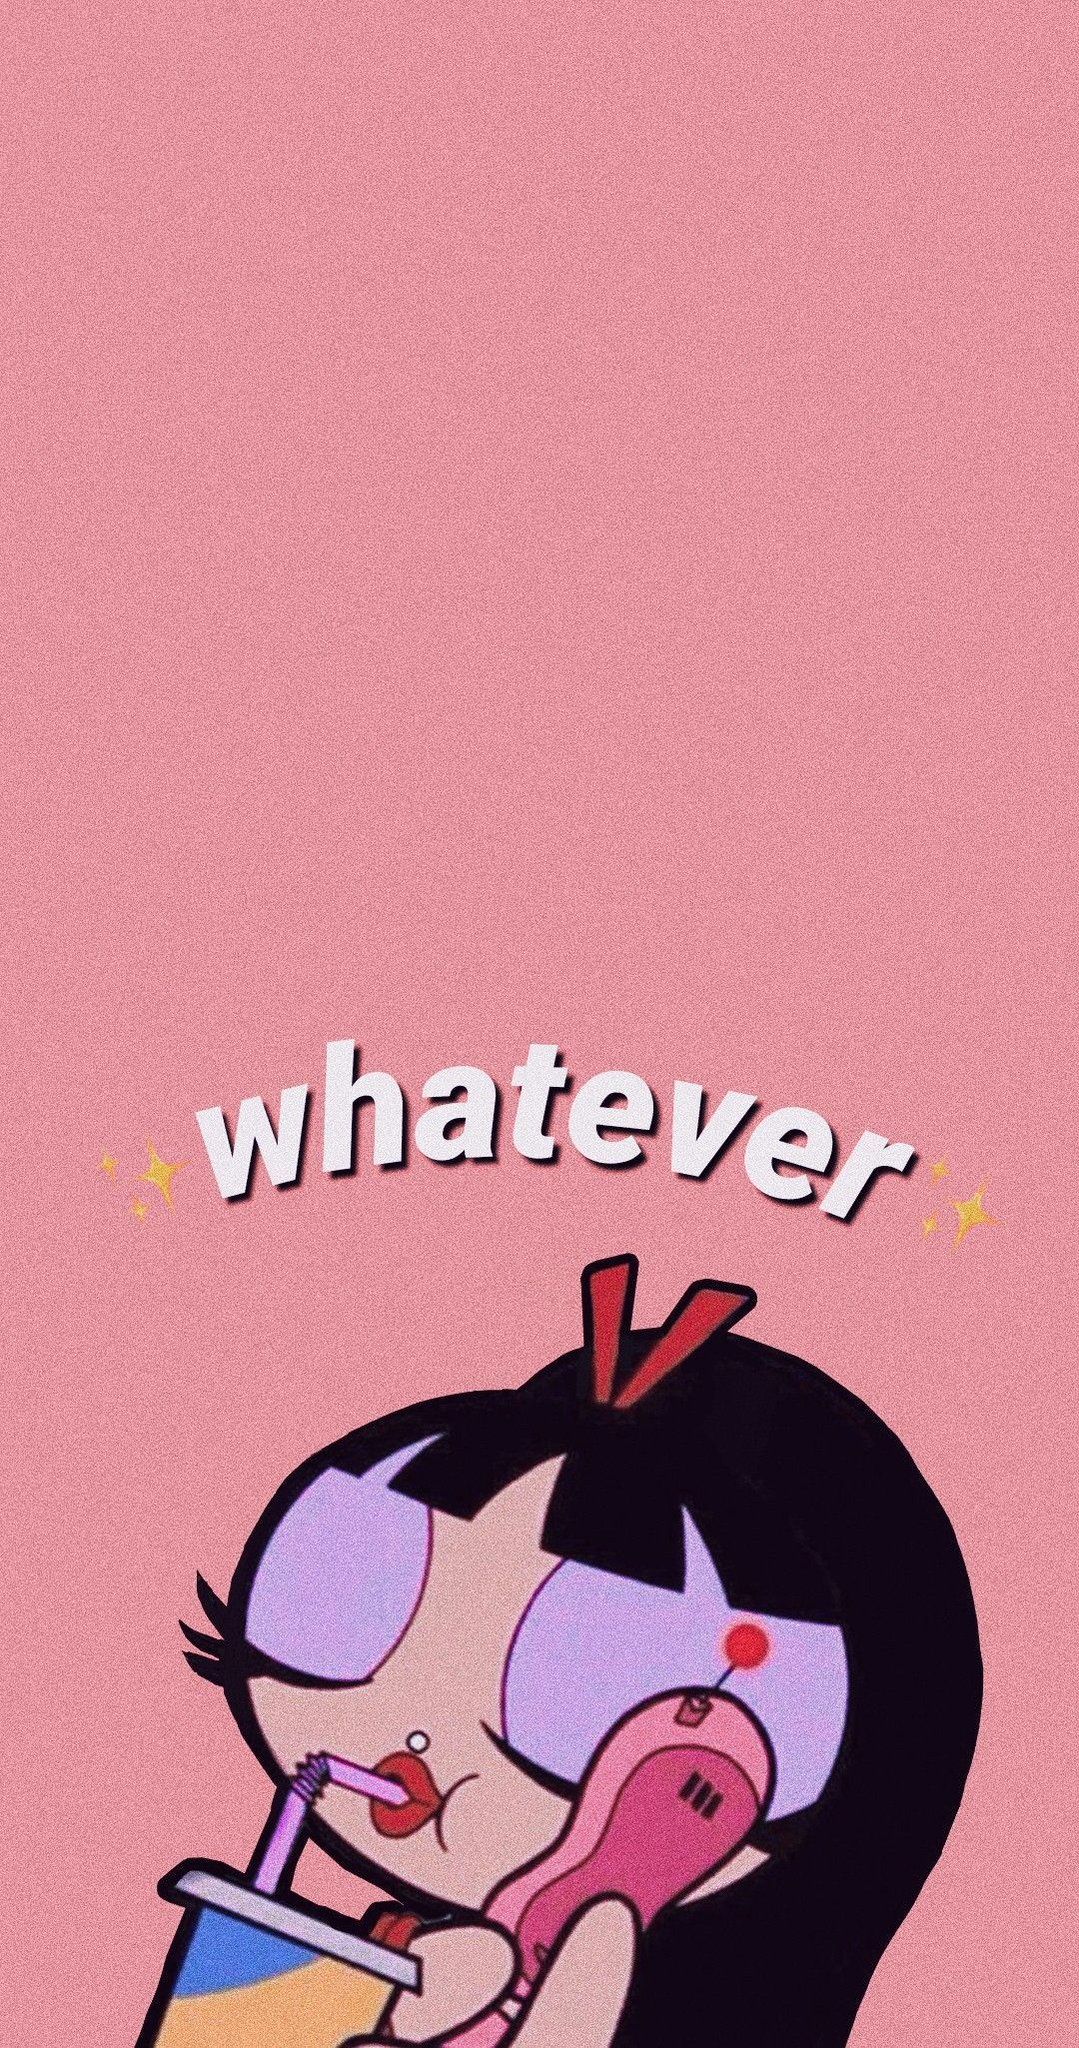 Whatever wallpaper for phone and desktop - Buttercup